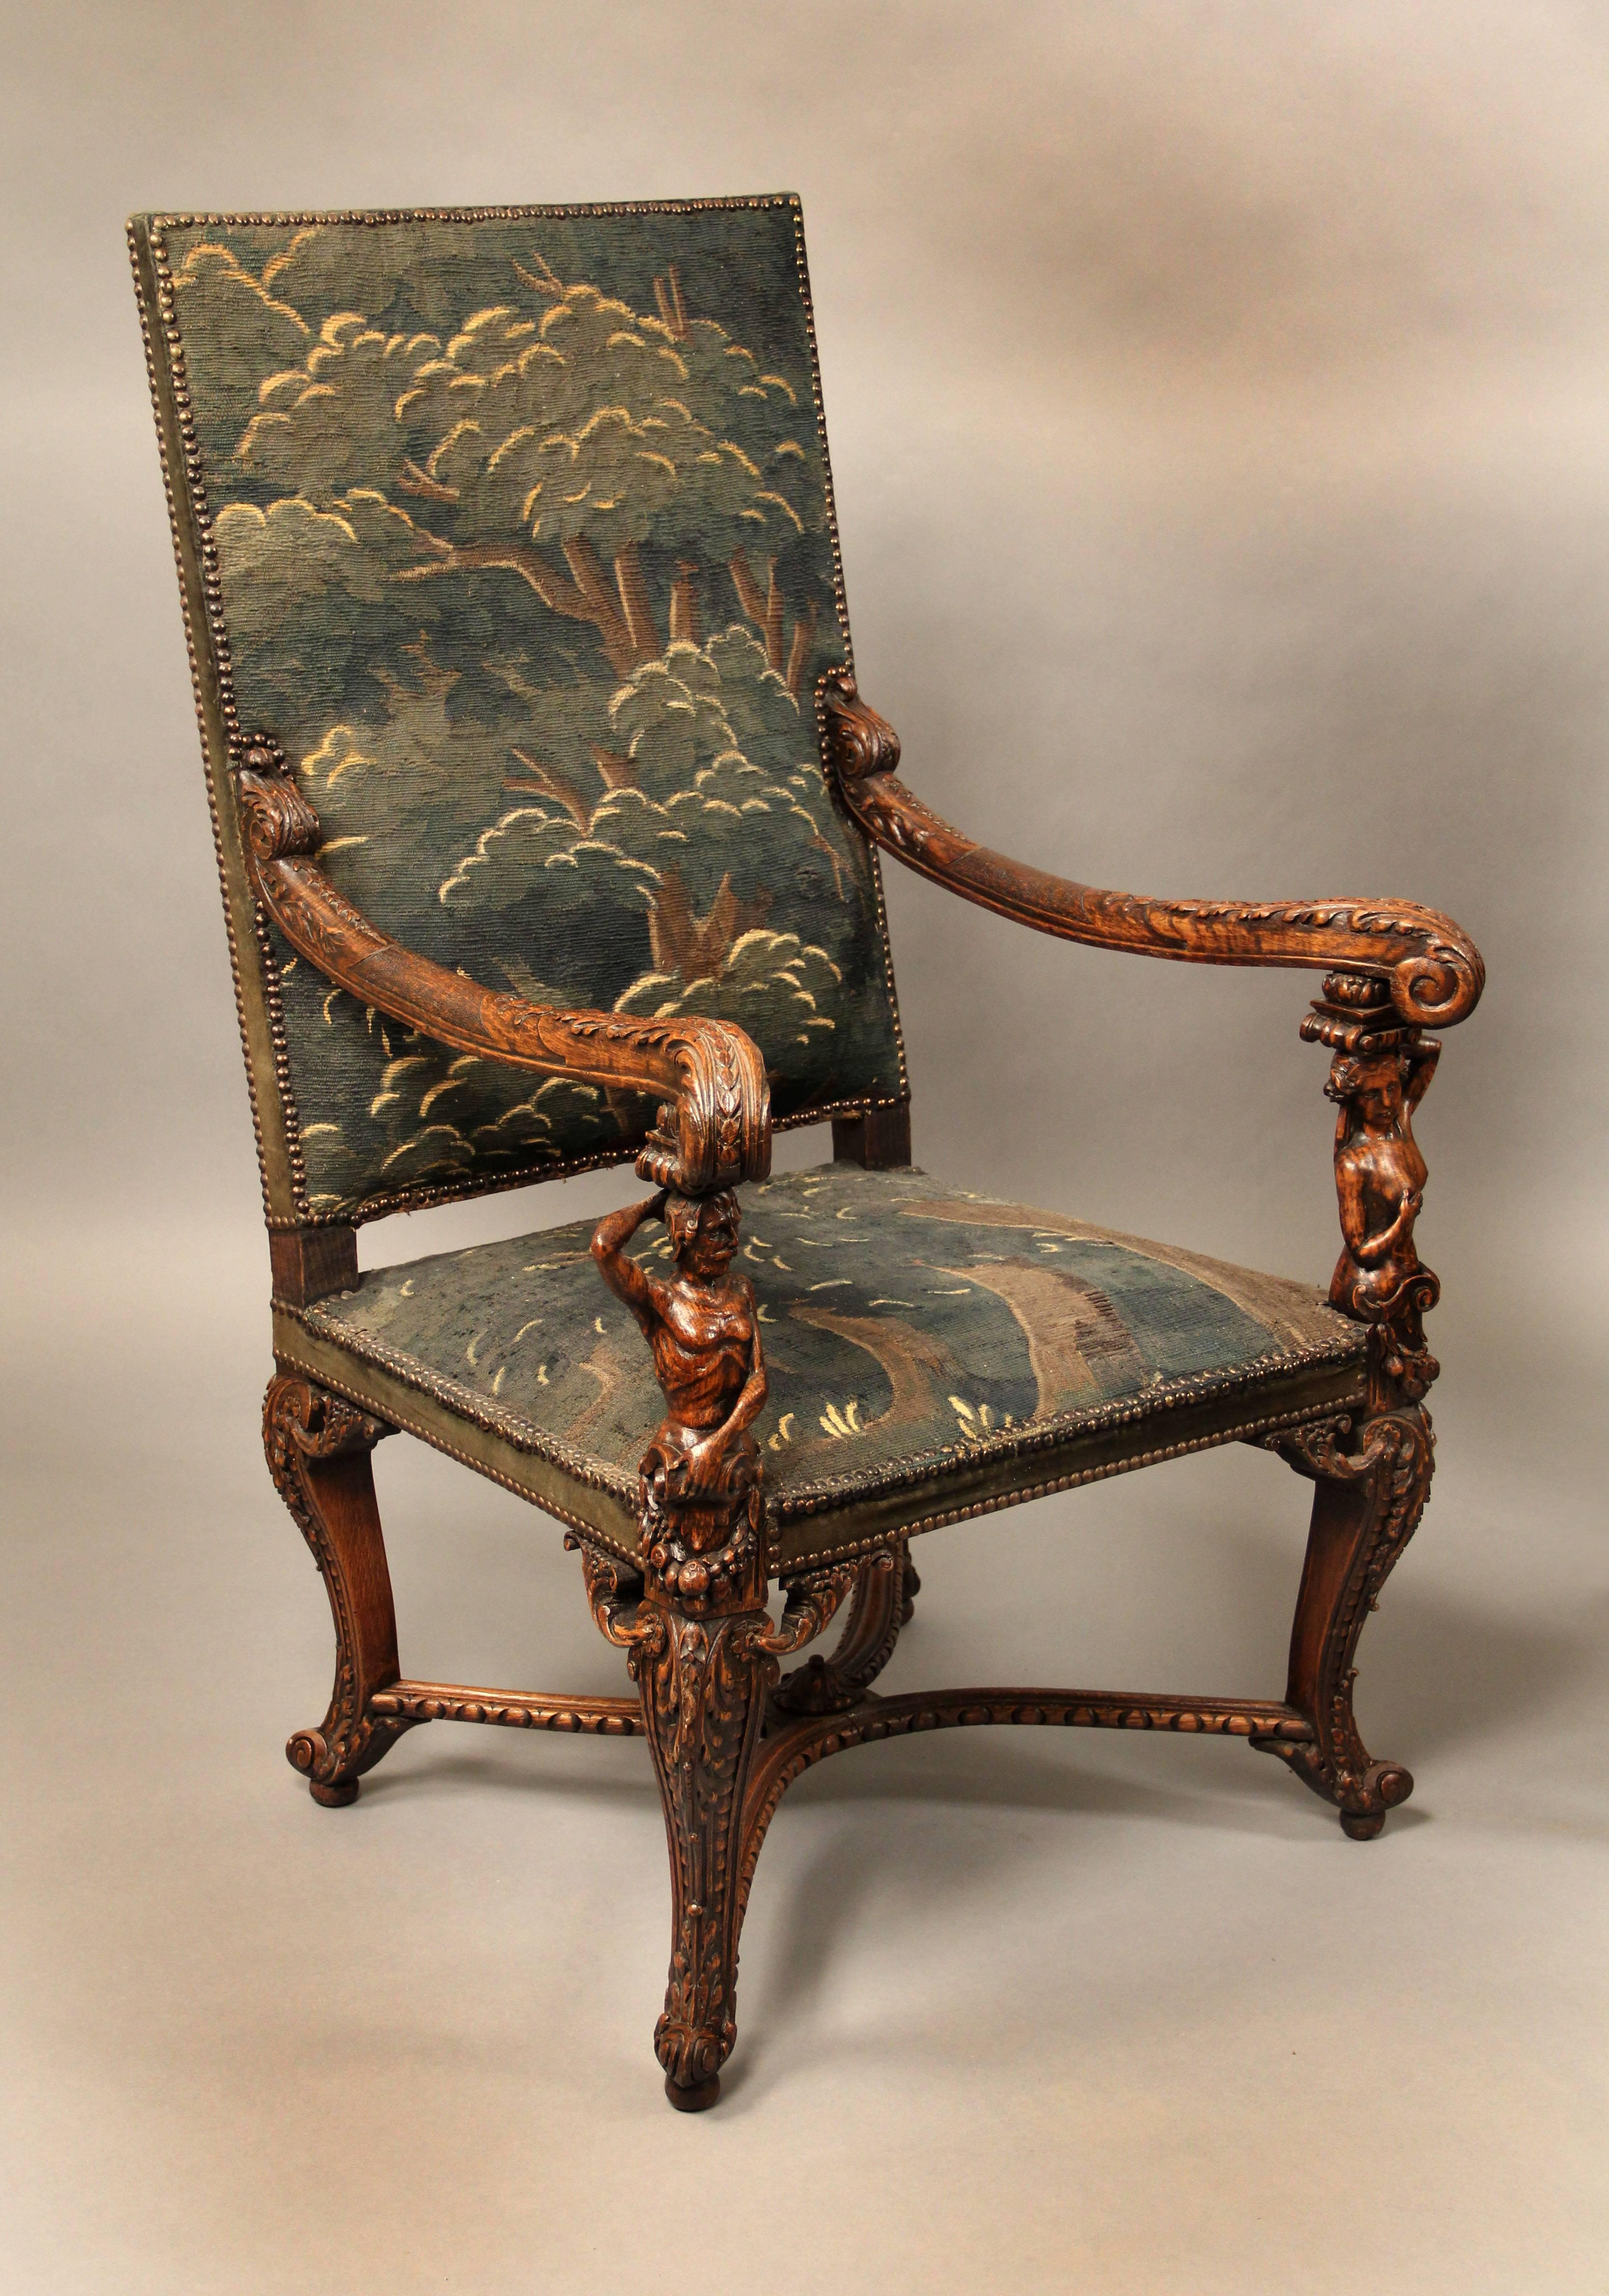 A fine pair of late 19th century carved wood armchairs.

Each chair with carved figures of a man or a woman supporting an arm.